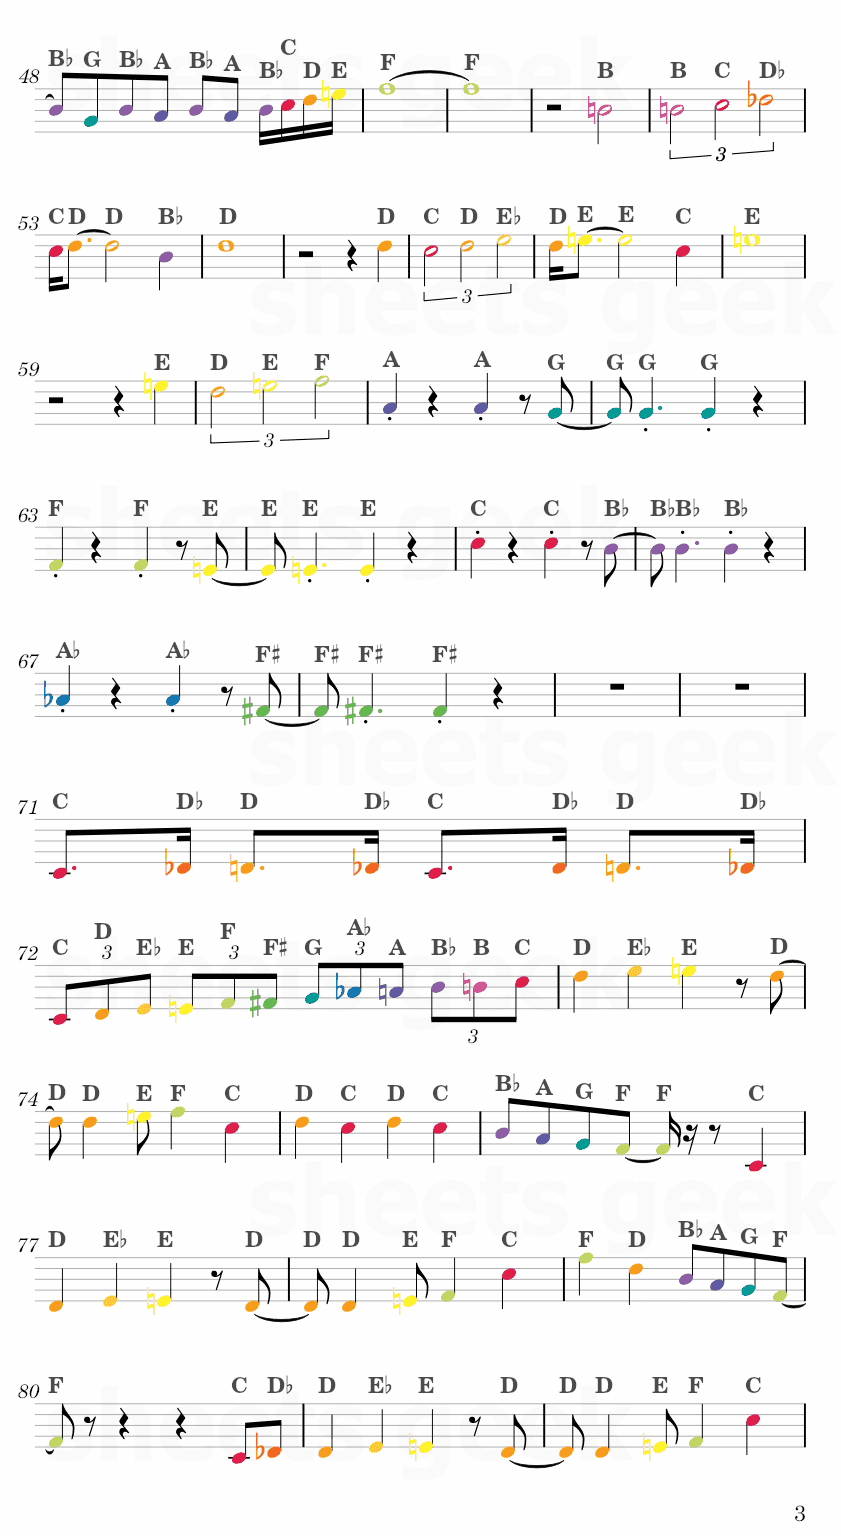 Coconut Mall - Mario Kart Wii Easy Sheet Music Free for piano, keyboard, flute, violin, sax, cello page 3